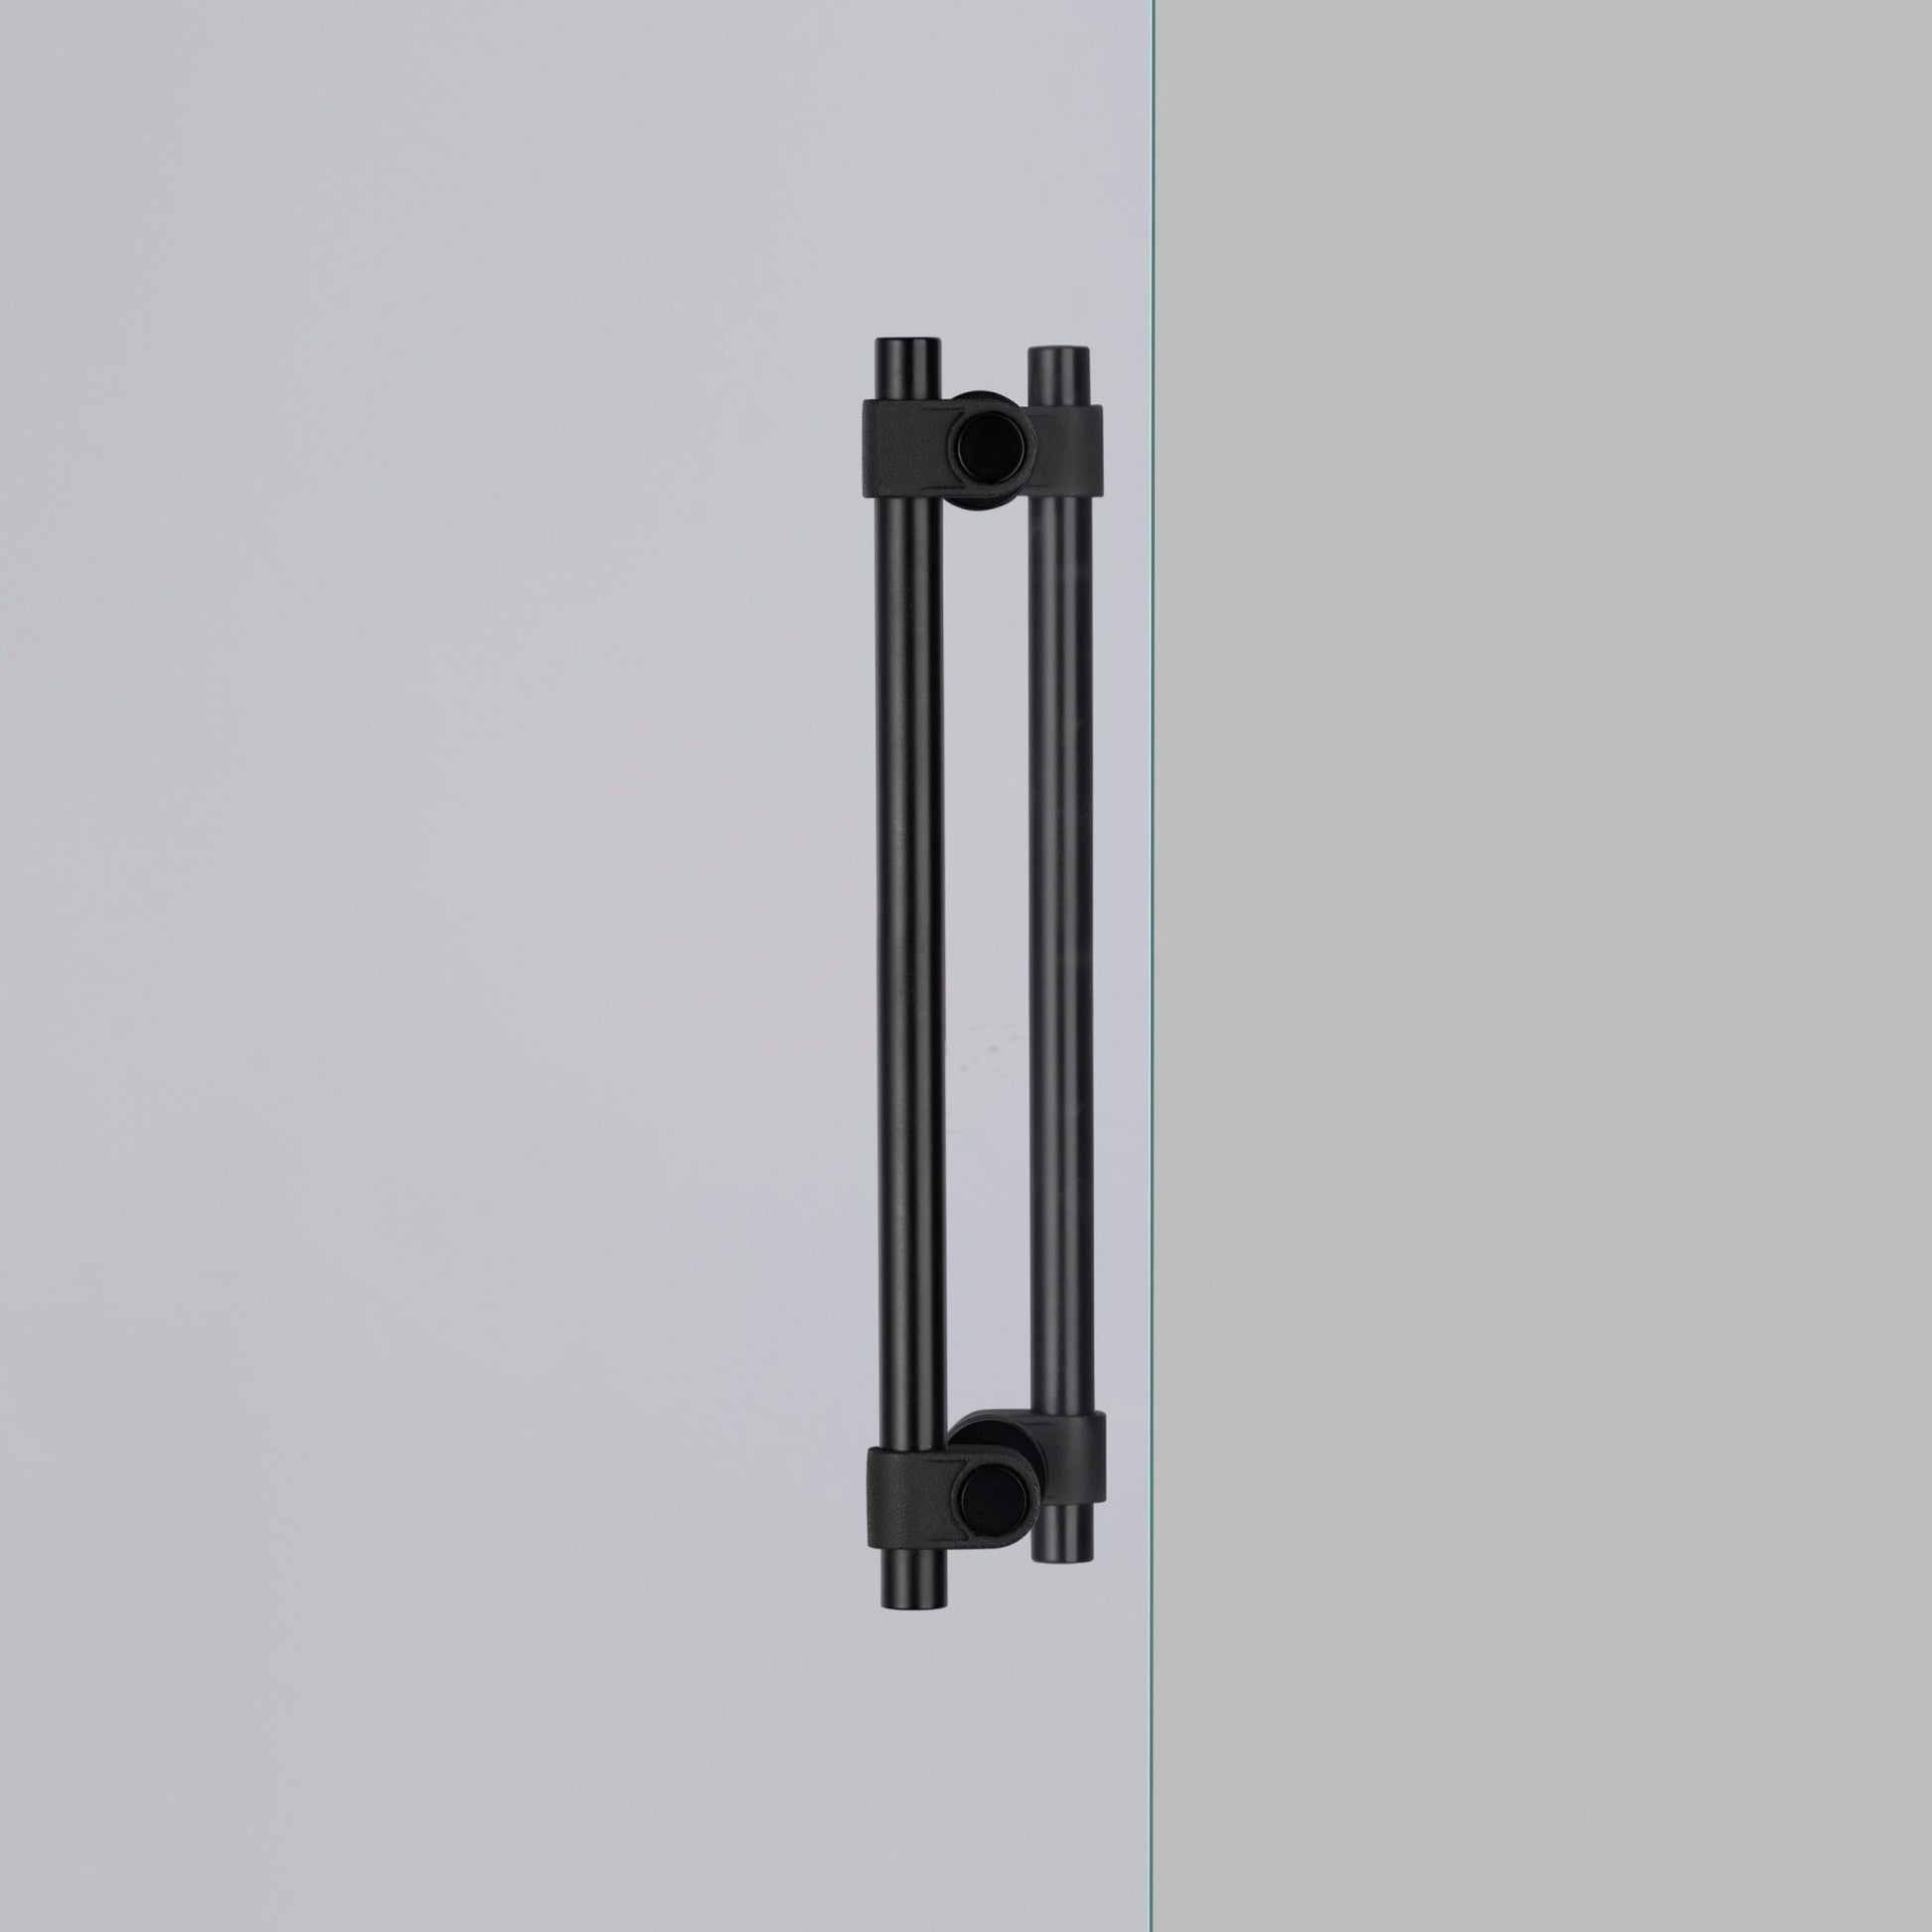 Matte Black Solid Double-Sided Pull Bar / Welders Black - |VESIMI Design| Luxury and Rustic bathrooms online